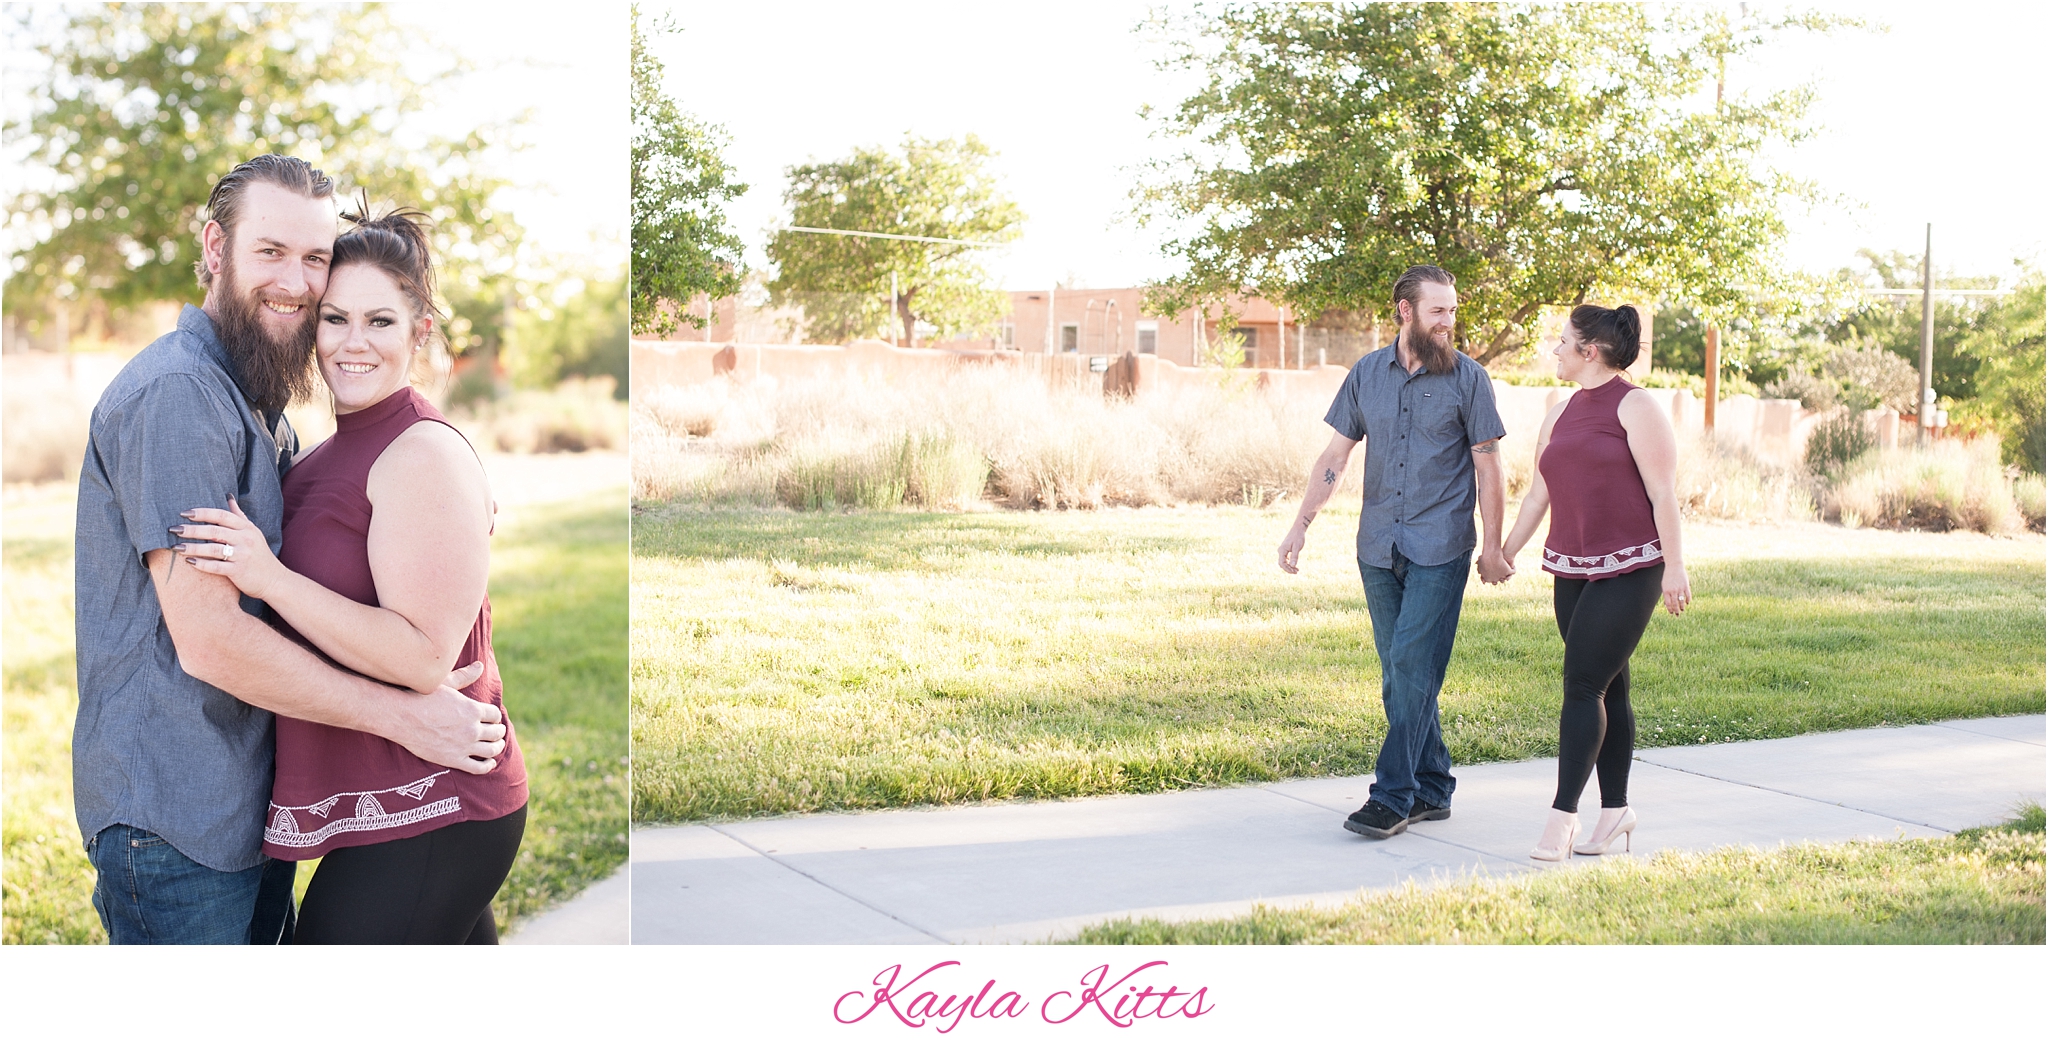 kayla kitts photography - albuquerque wedding photographer - albuquerque engagement photographer - nm wedding - albuquerque wedding - nm wedding - unm engagement - bosque engagement session_0009.jpg